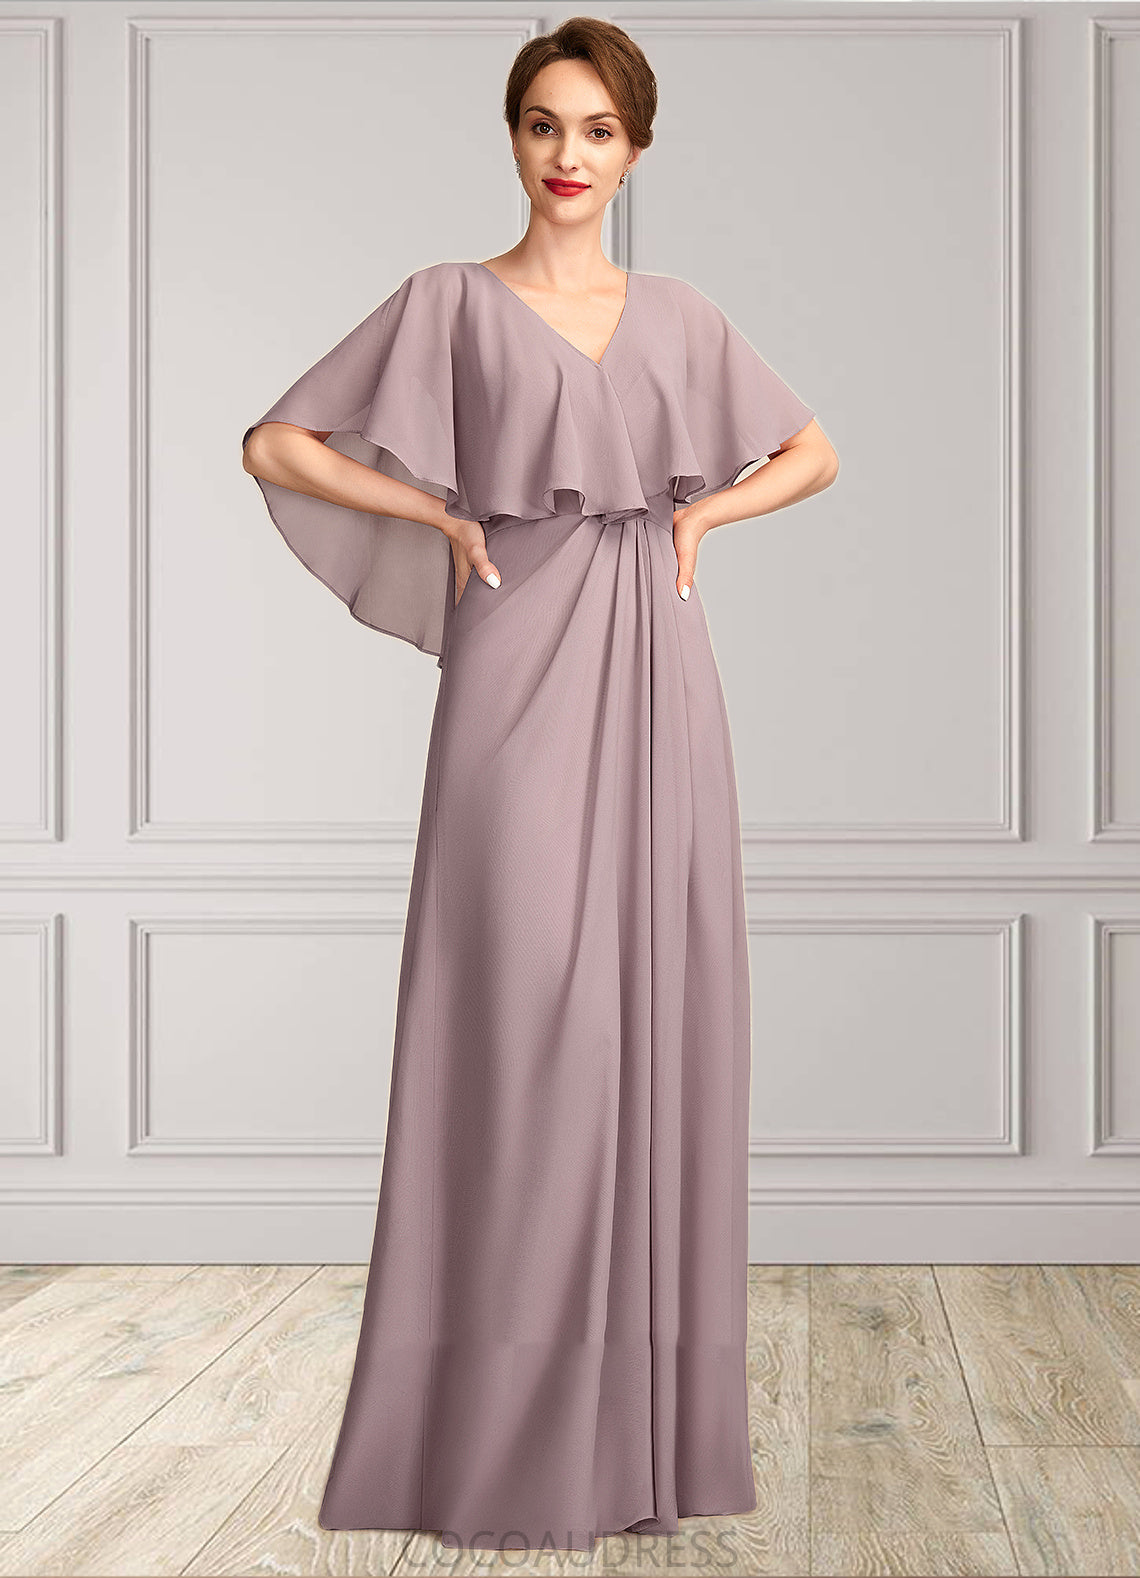 Ellie A-Line V-neck Floor-Length Chiffon Mother of the Bride Dress With Ruffle 126P0015026